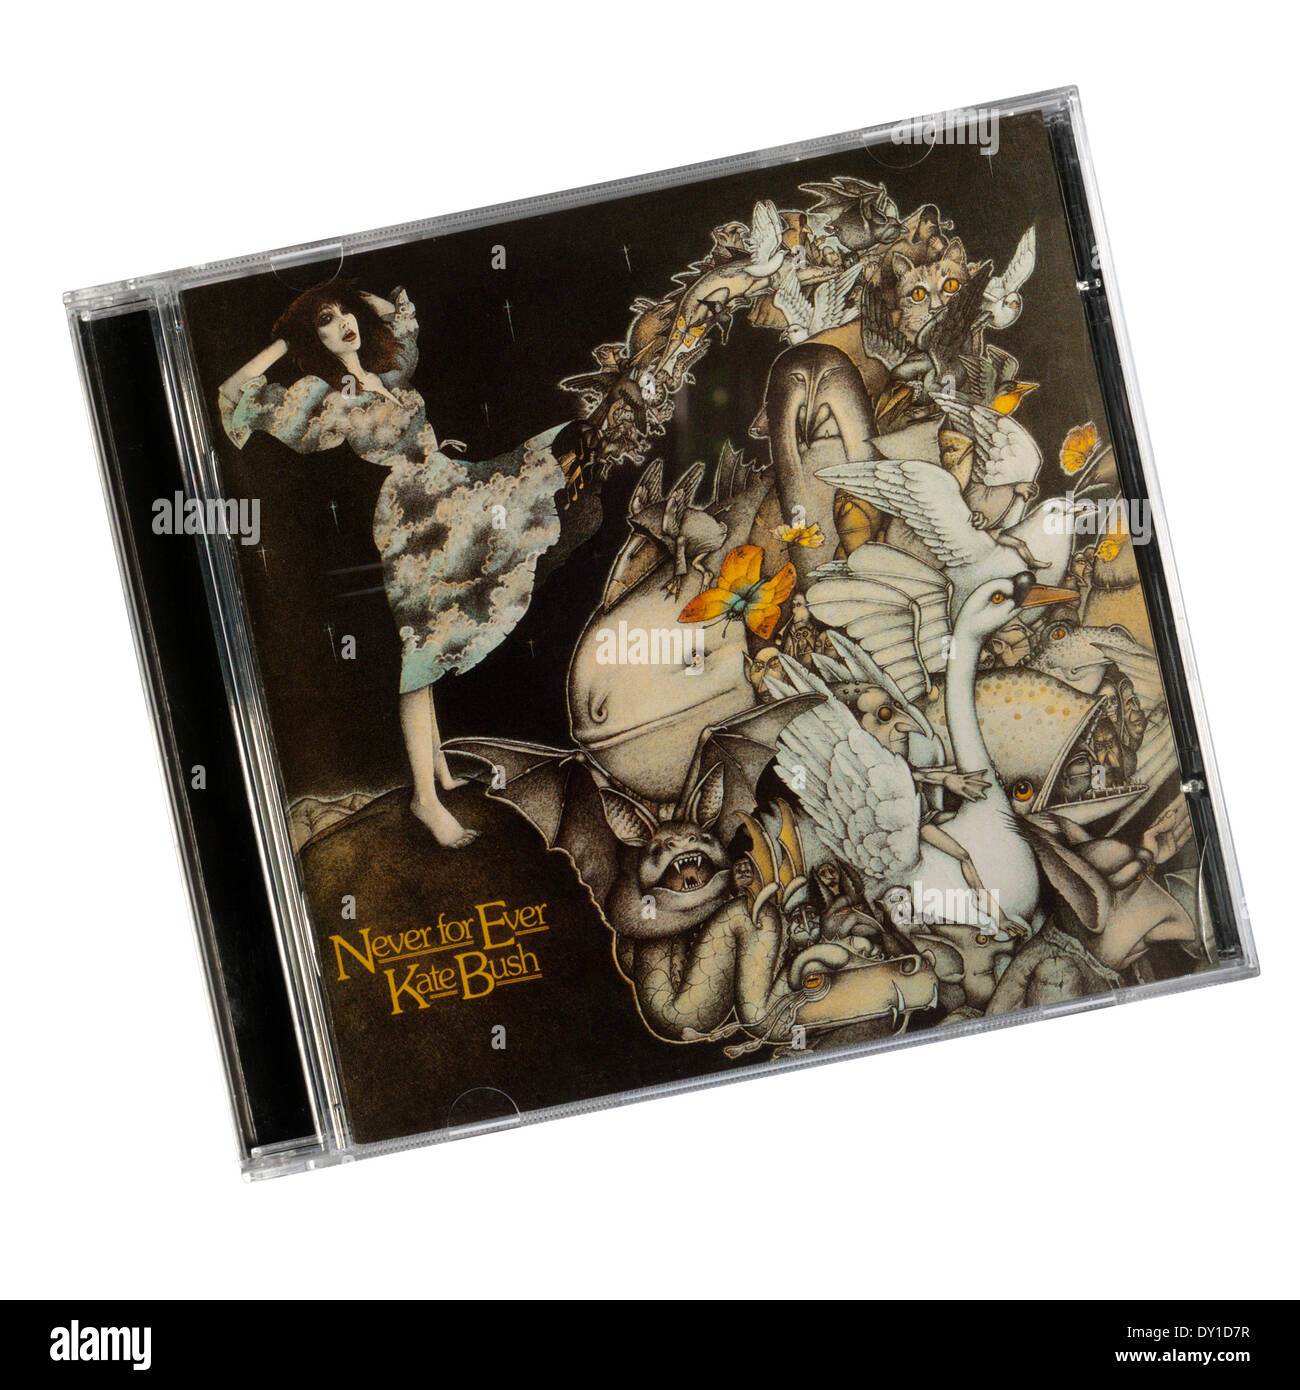 Never for Ever was the 3rd album by the English singer Kate Bush, released in 1980. Stock Photo